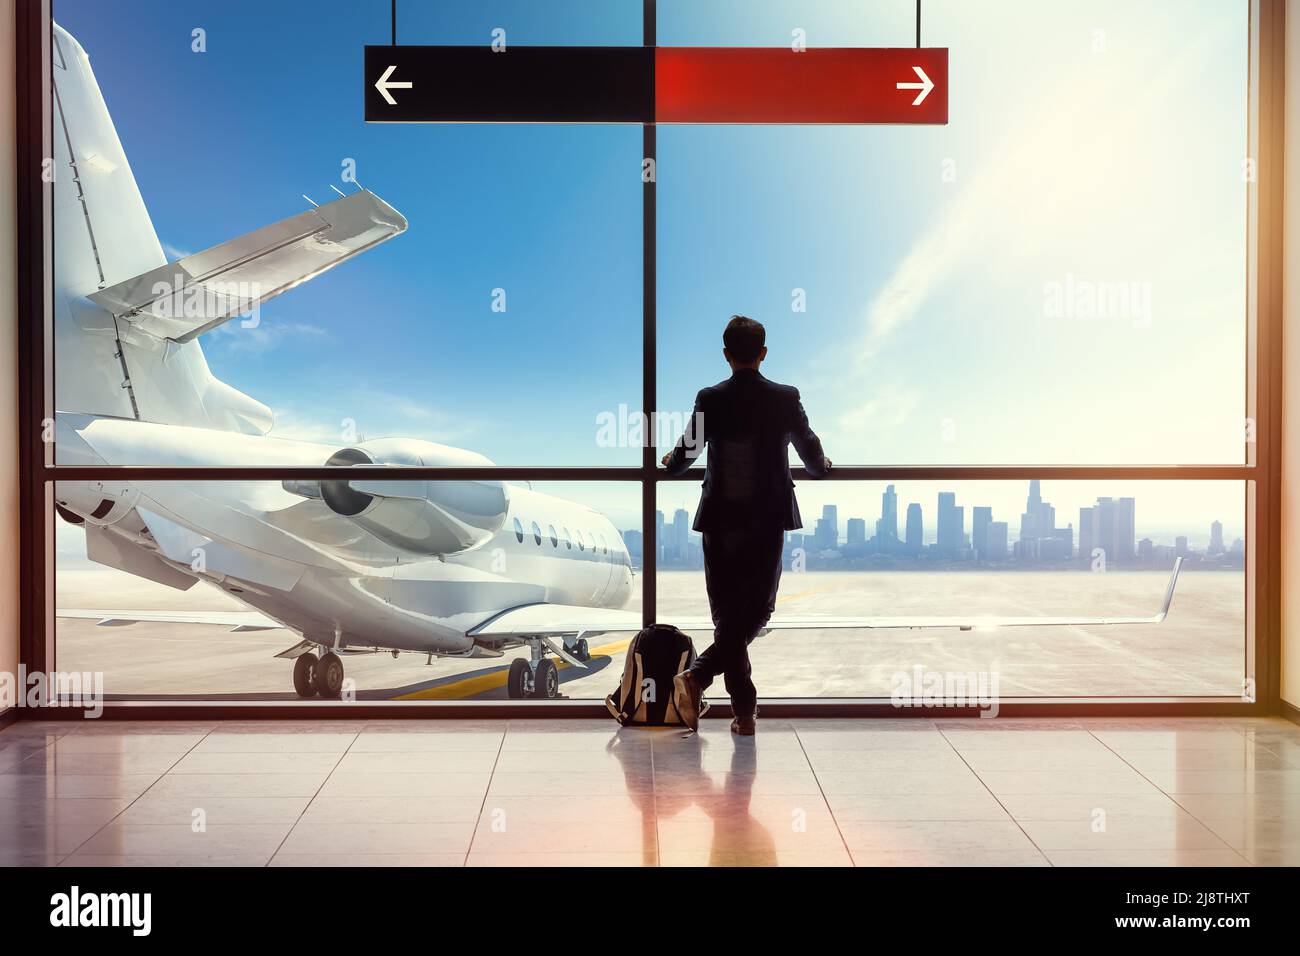 passenger at the airport is looking at a plane Stock Photo